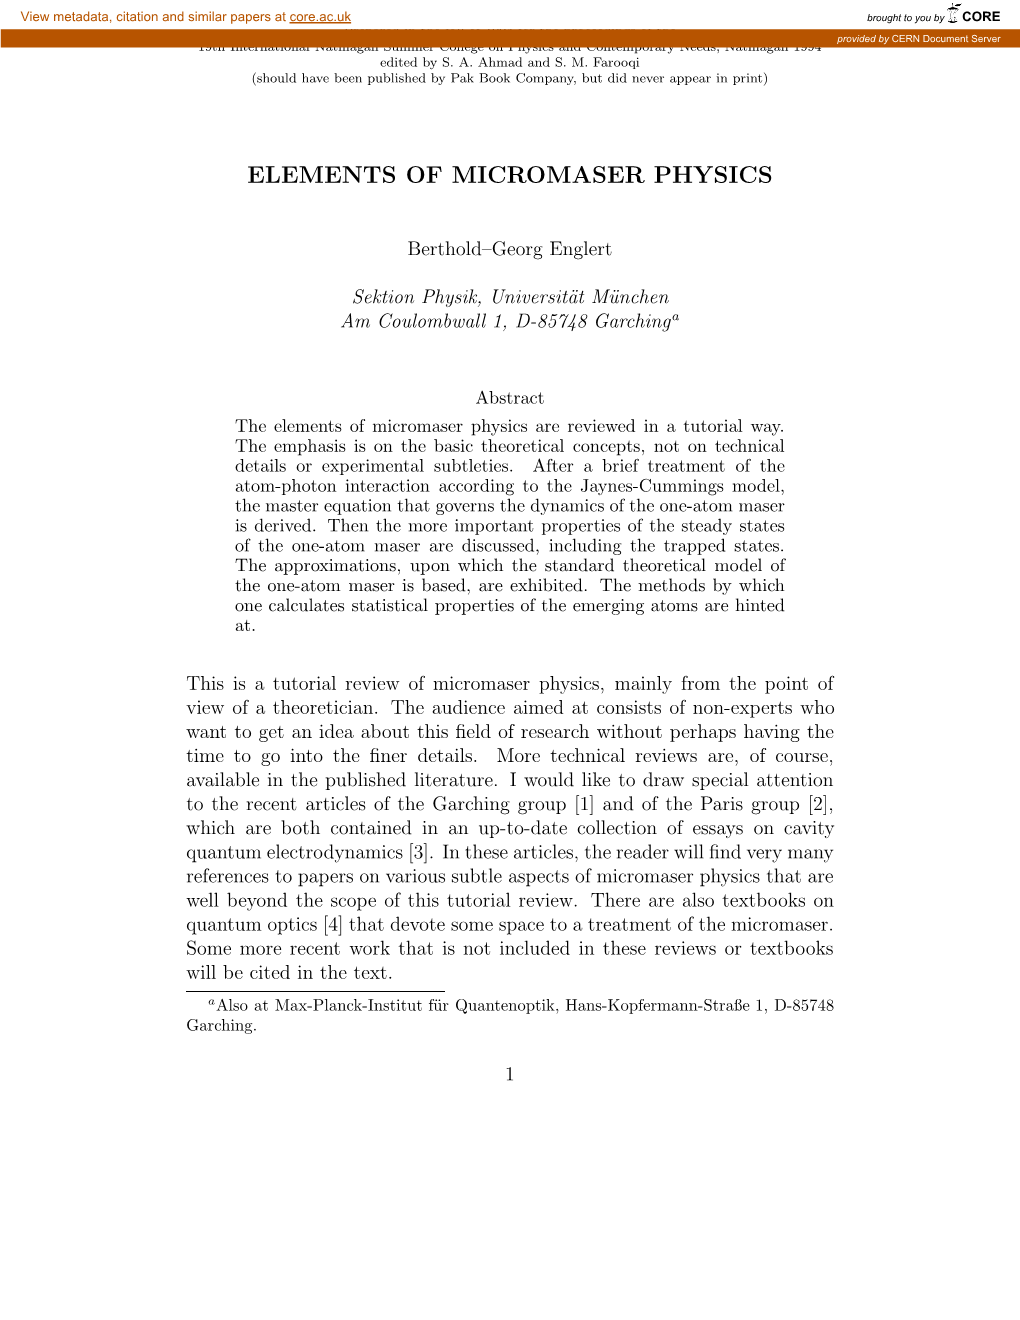 Elements of Micromaser Physics